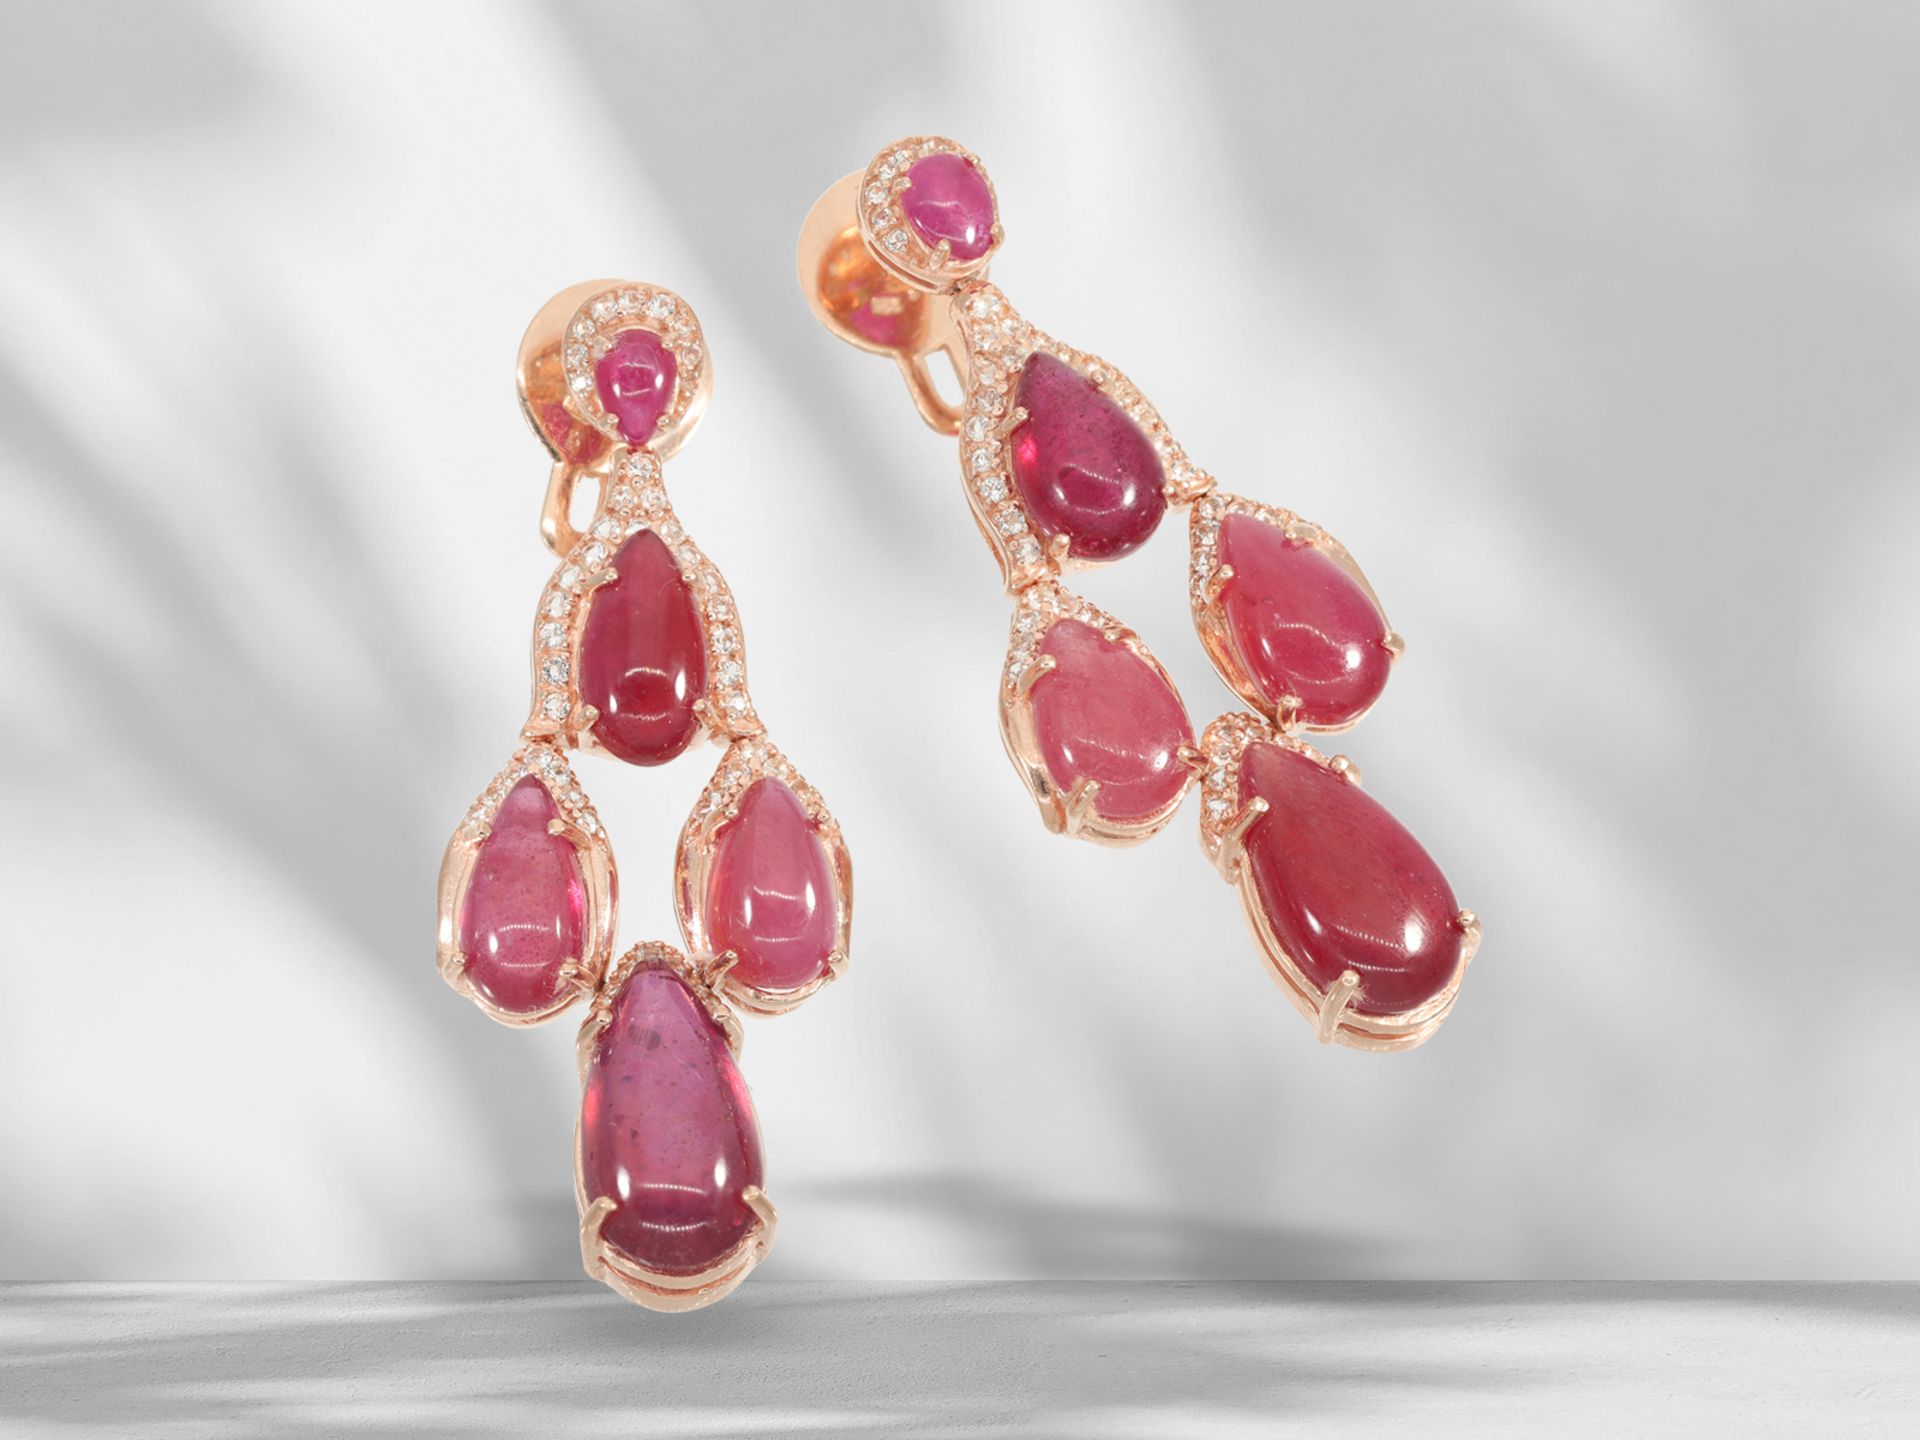 Extremely attractive, like new earrings with rubies and white topazes, silver gilt